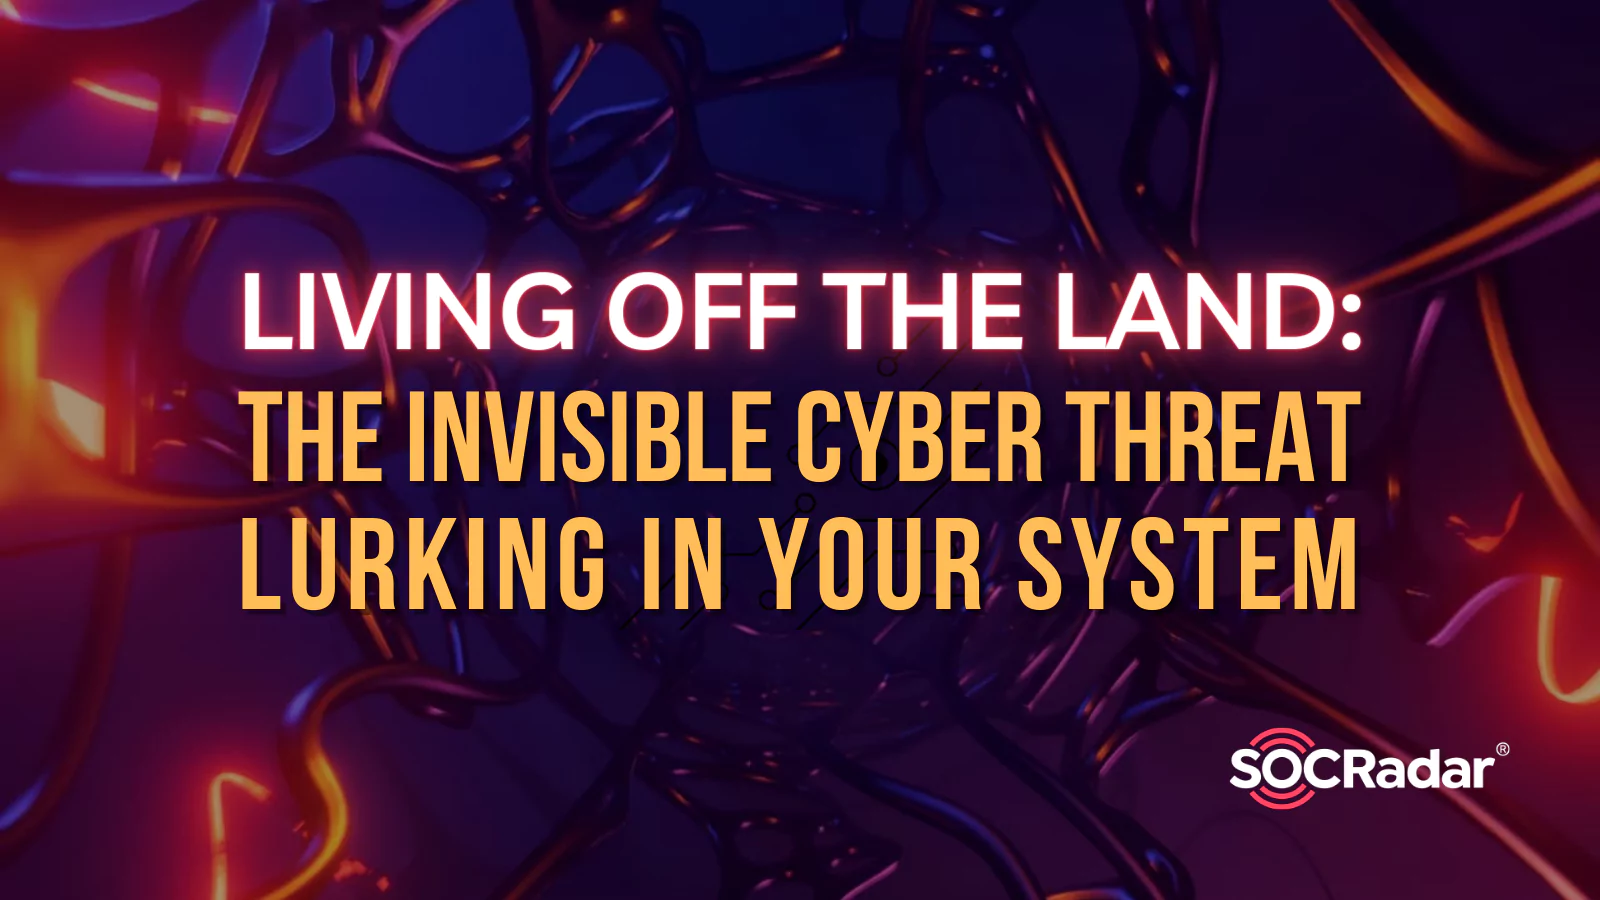 SOCRadar® Cyber Intelligence Inc. | Living Off the Land (LOTL): The Invisible Cyber Threat Lurking in Your System